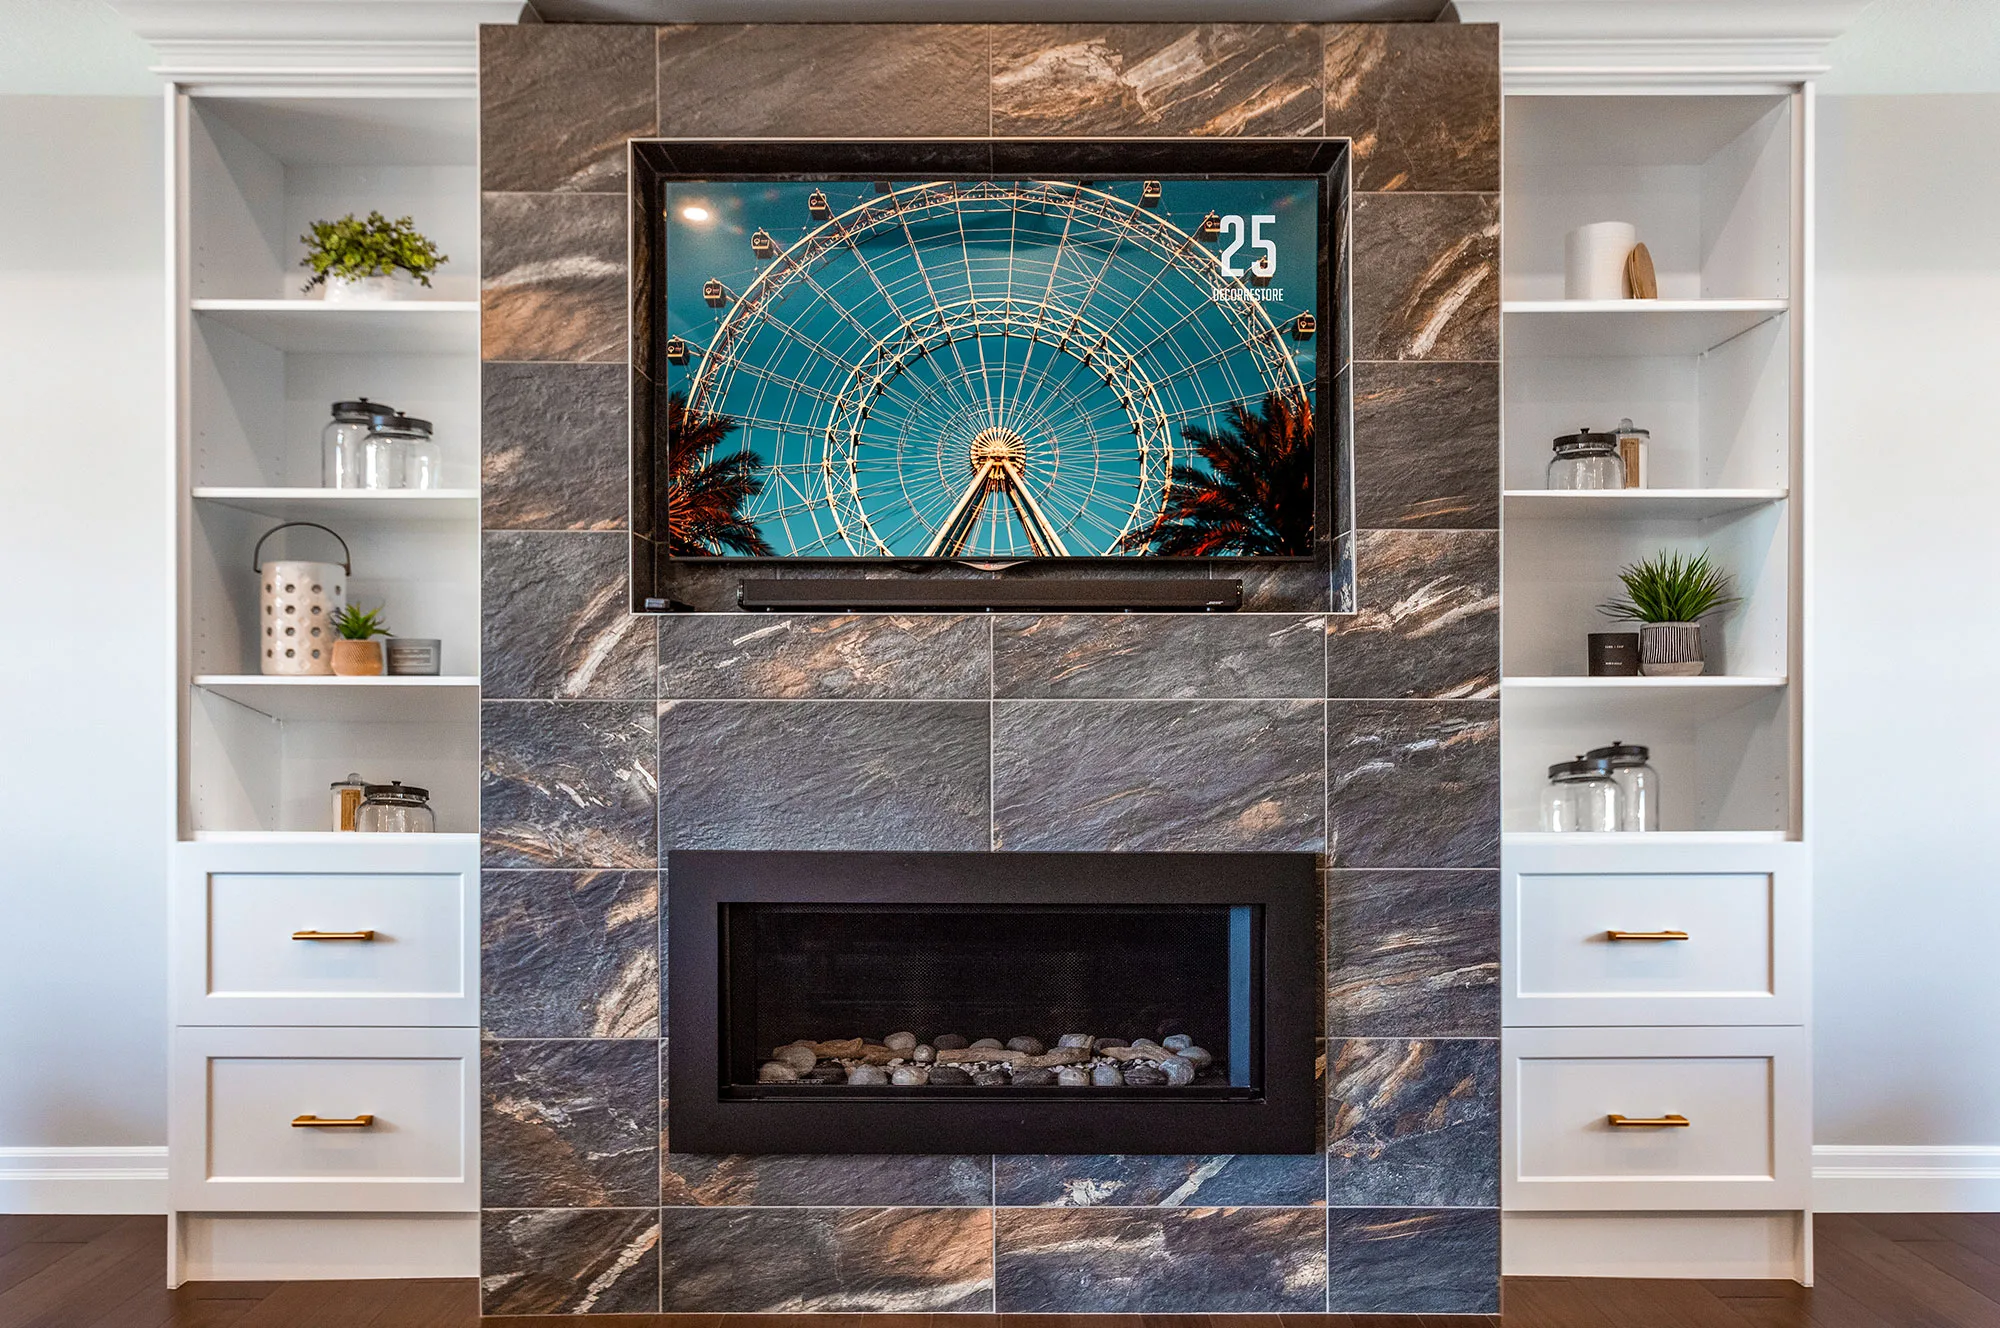 A fireplace with tv above surrounded by tile along with shelving drawers on either side